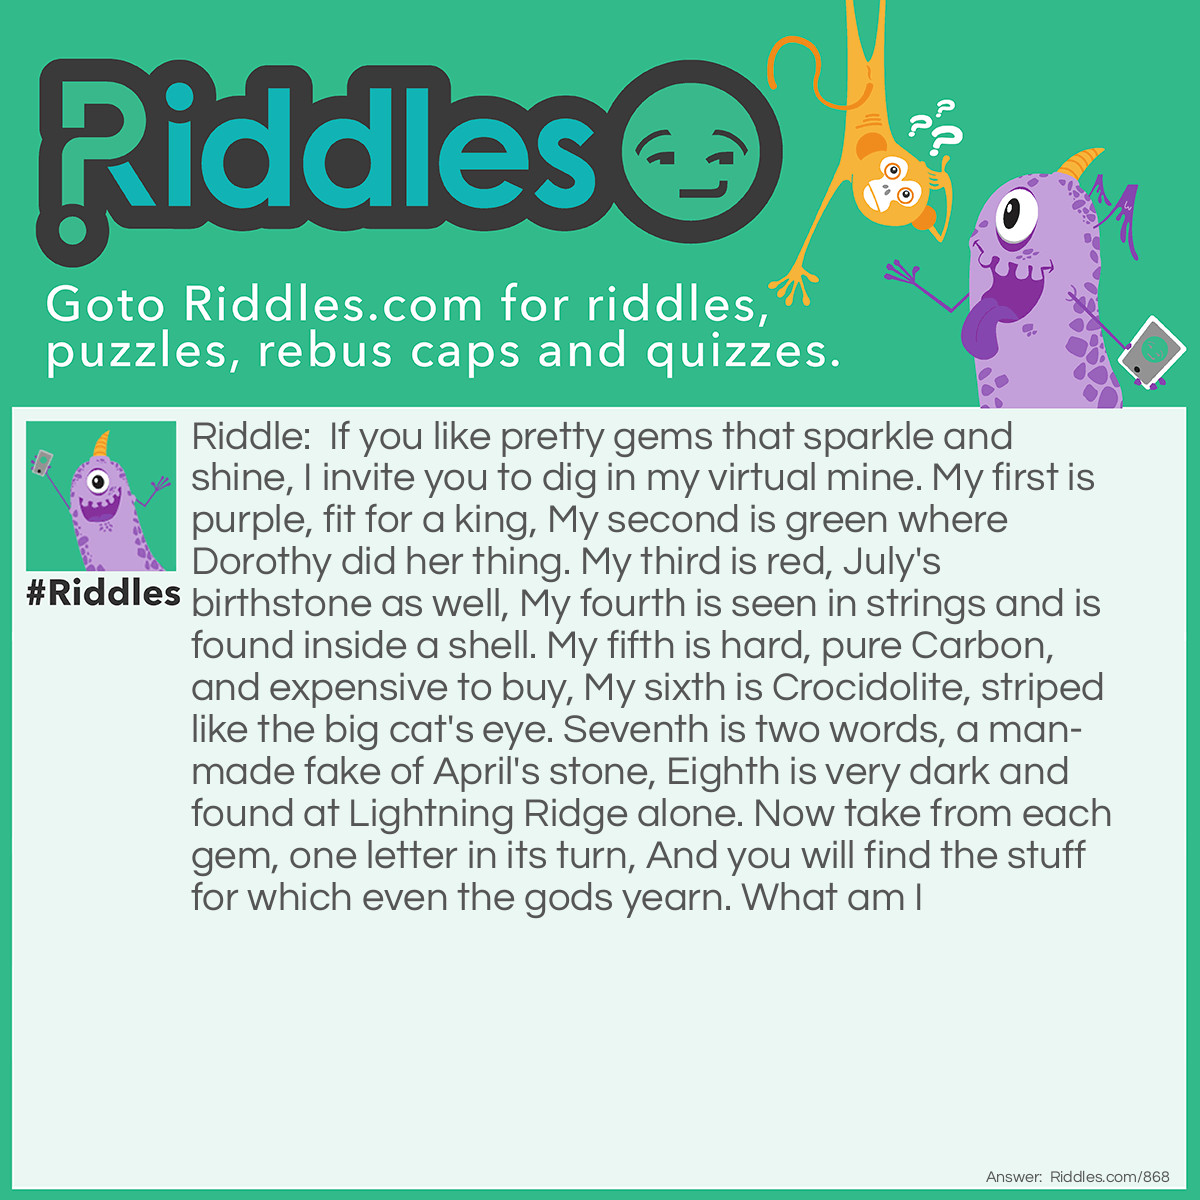 Riddle: If you like pretty gems that sparkle and shine, I invite you to dig in my virtual mine. My first is purple, fit for a king, My second is green where Dorothy did her thing. My third is red, July's birthstone as well, My fourth is seen in strings and is found inside a shell. My fifth is hard, pure Carbon, and expensive to buy, My sixth is Crocidolite, striped like the big cat's eye. Seventh is two words, a man-made fake of April's stone, Eighth is very dark and found at Lightning Ridge alone. Now take from each gem, one letter in its turn, And you will find the stuff for which even the gods yearn. What am I? Answer: Answer: Ambrosia The gems are: Amethyst Emerald ( Emerald City in the Wizard of Oz ) Ruby Pearl Diamond Tiger's eye Cubic Zirconium (Fake diamond) Black Opal Taking the first letter of Amethyst, second of Emerald, etc.. gives Ambrosia - The food of the gods.